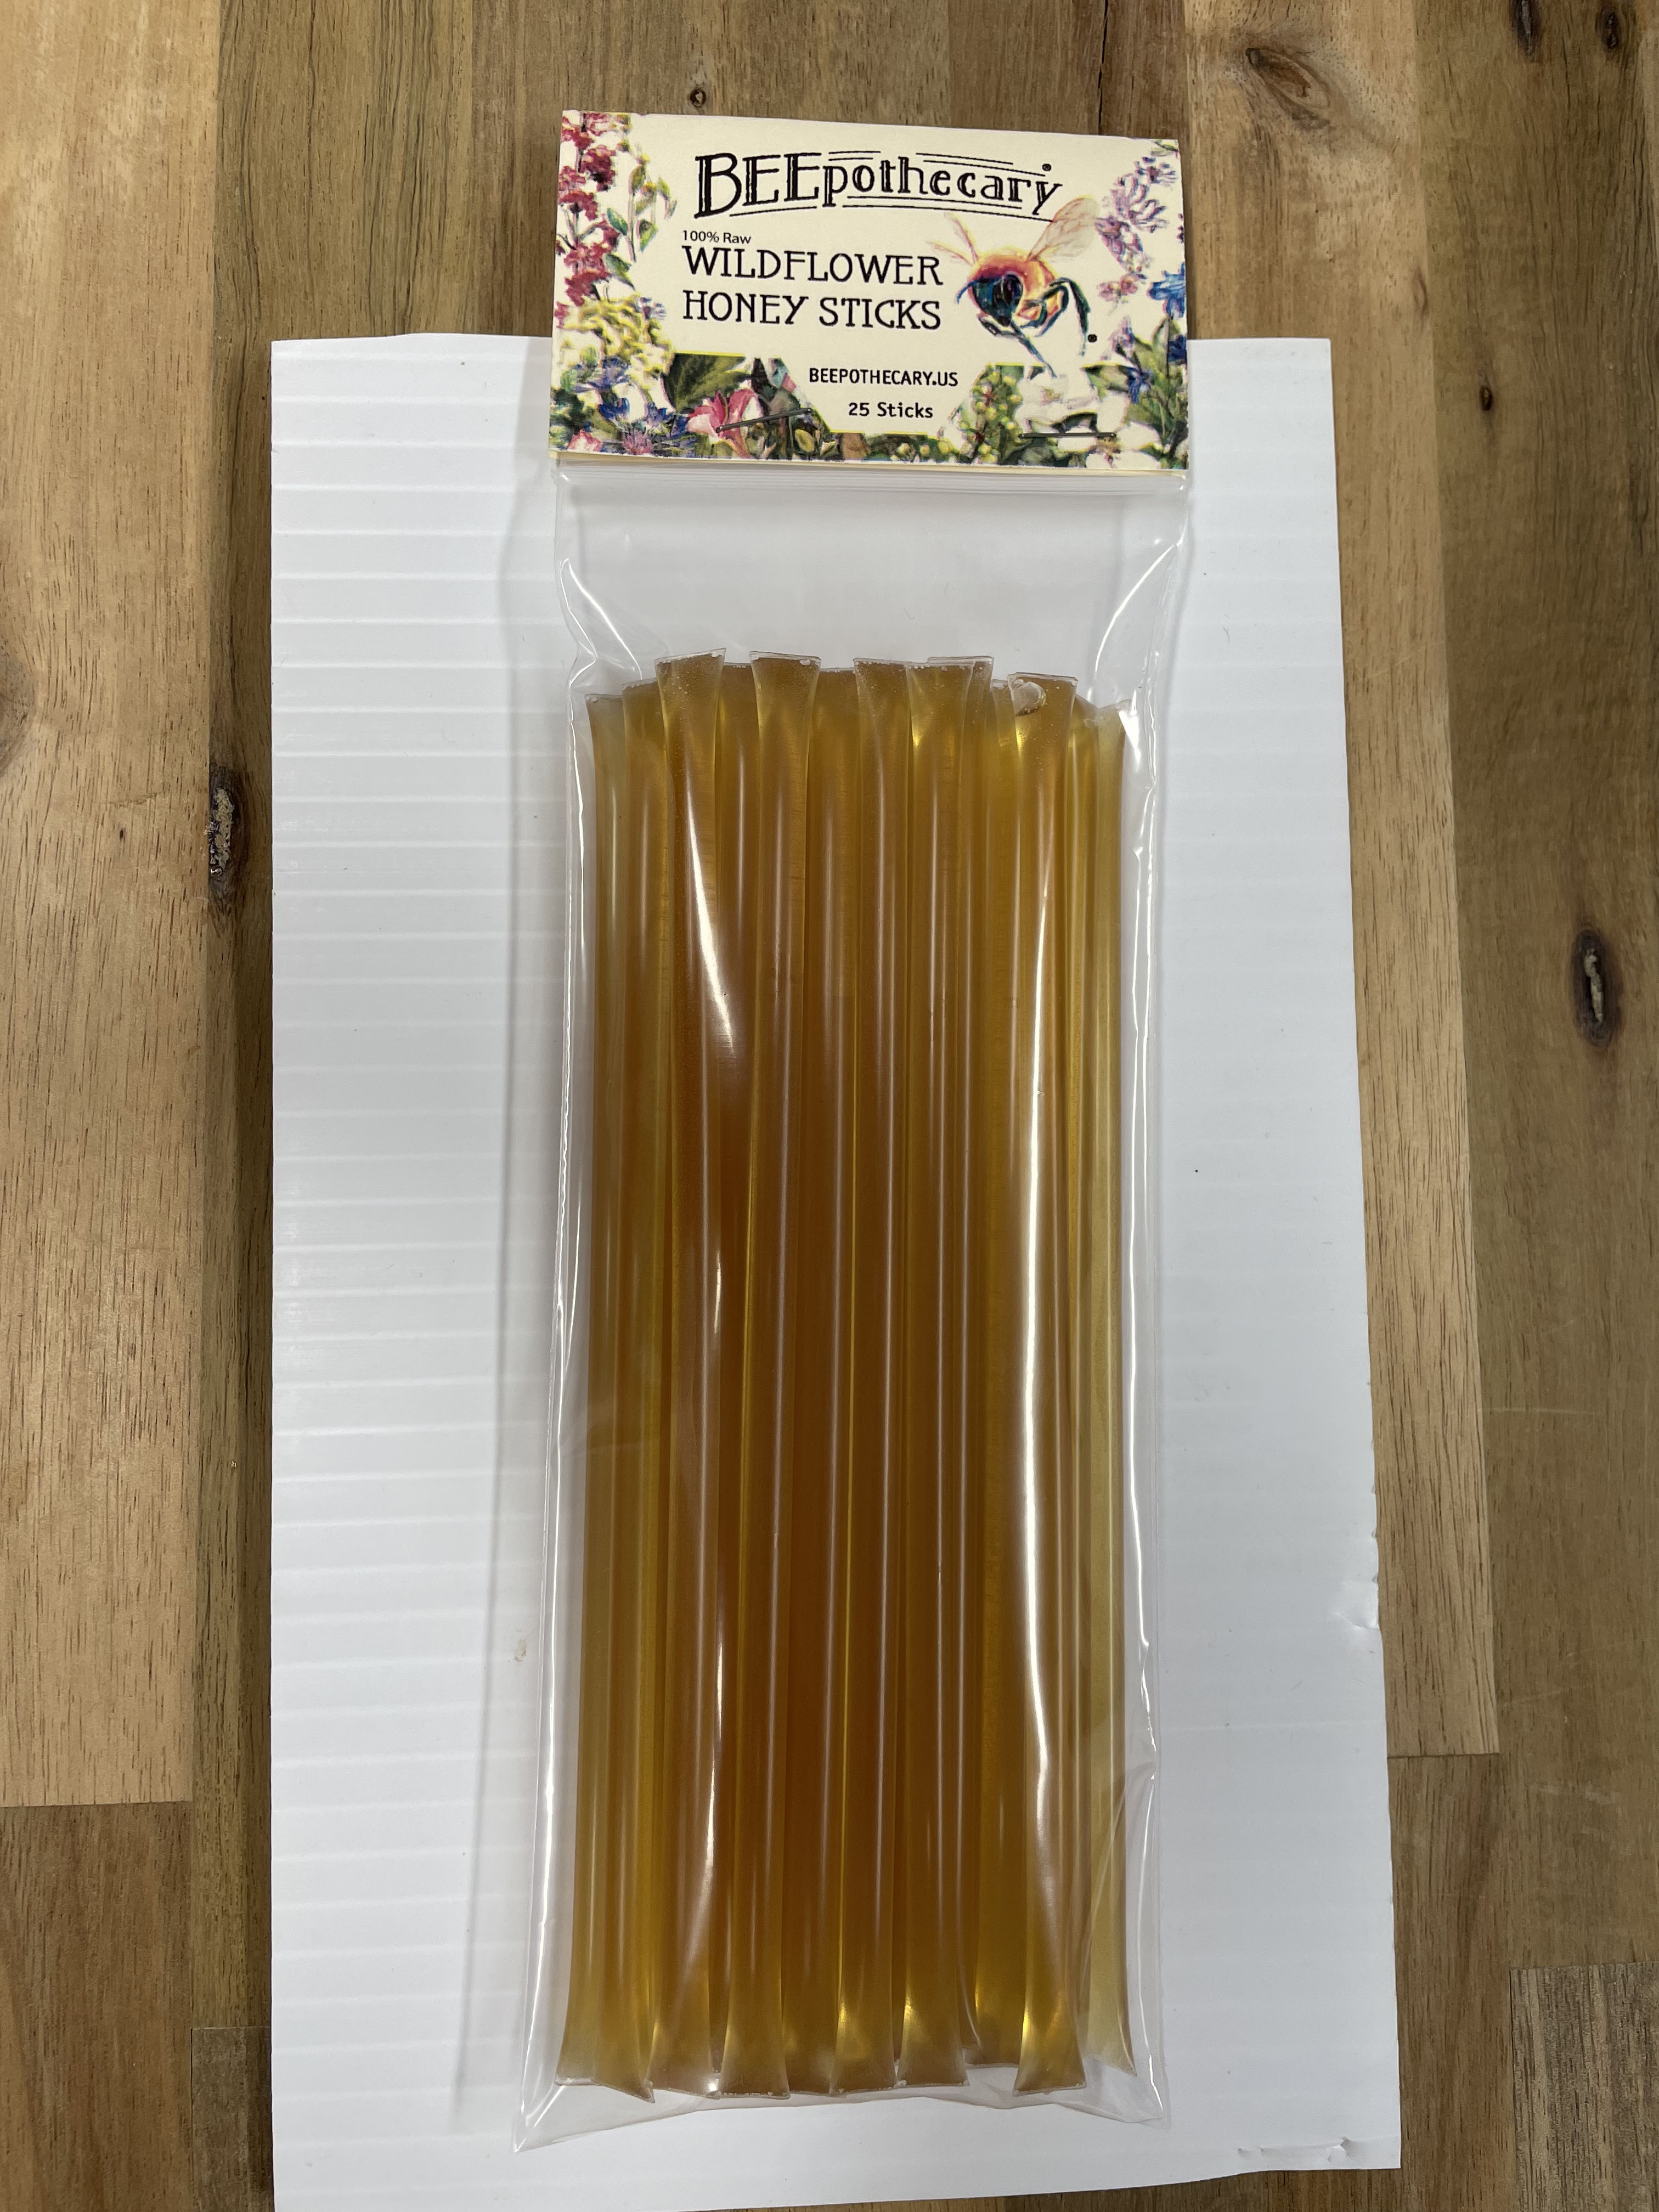 BEEpothecary Wildflower honey stick in 25 count clear packaging. Honey is deep golden color.